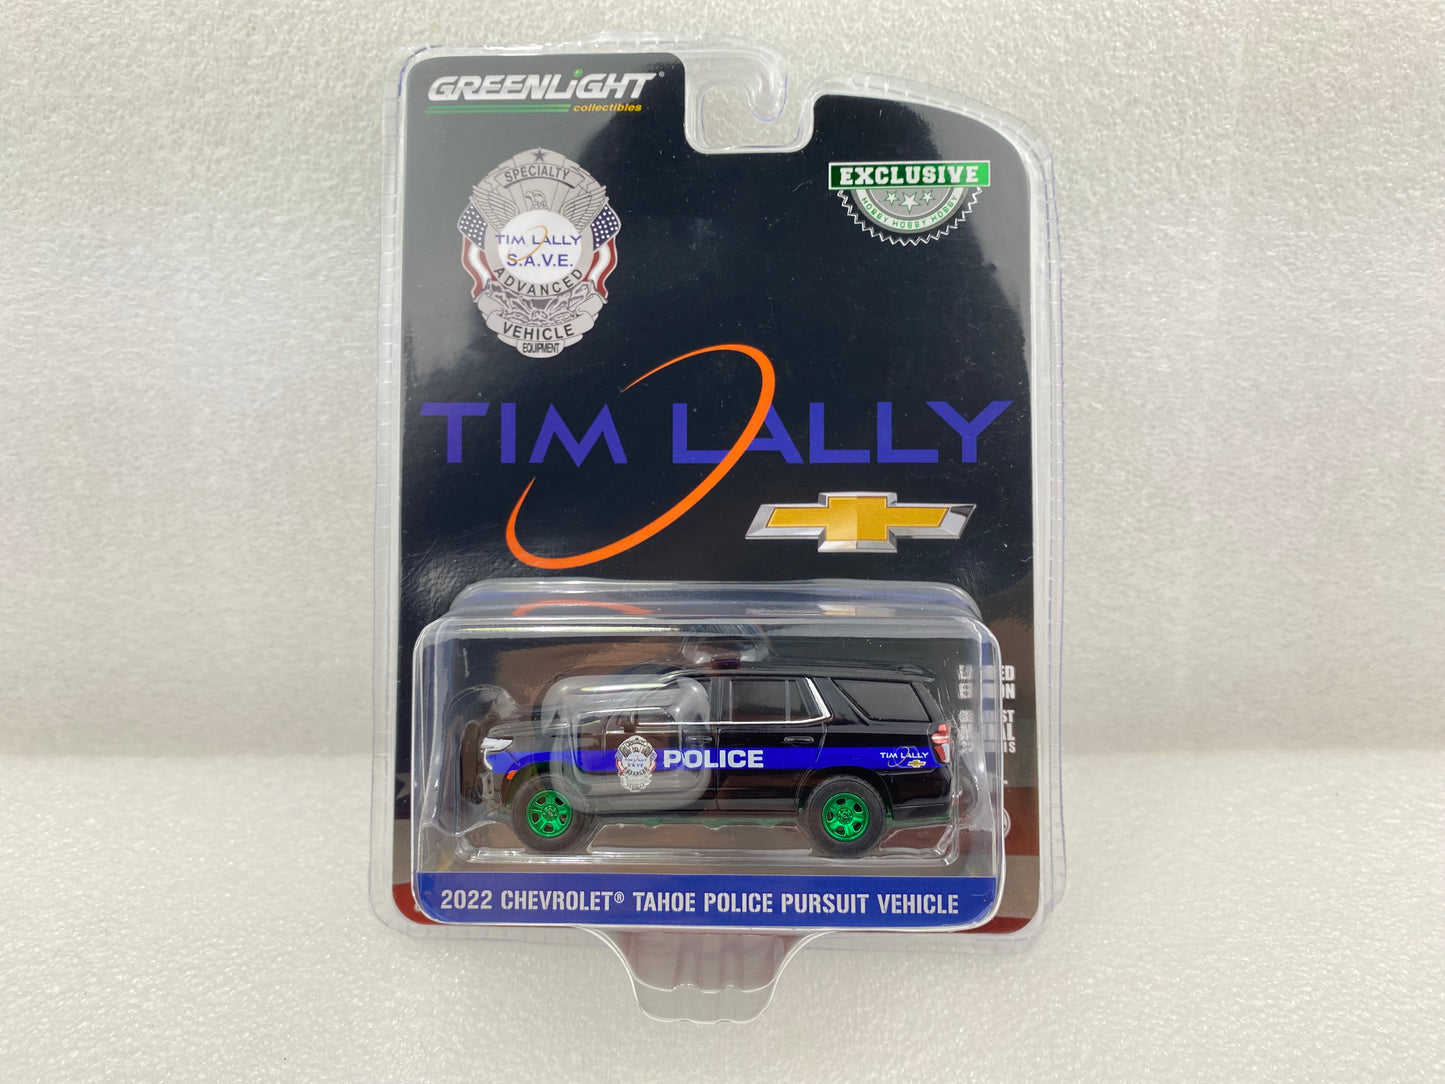 GreenLight Green Machine 1:64 2022 Chevrolet Tahoe Police Pursuit Vehicle (PPV) - Tim Lally Chevrolet, Warrensville Heights, Ohio 30443